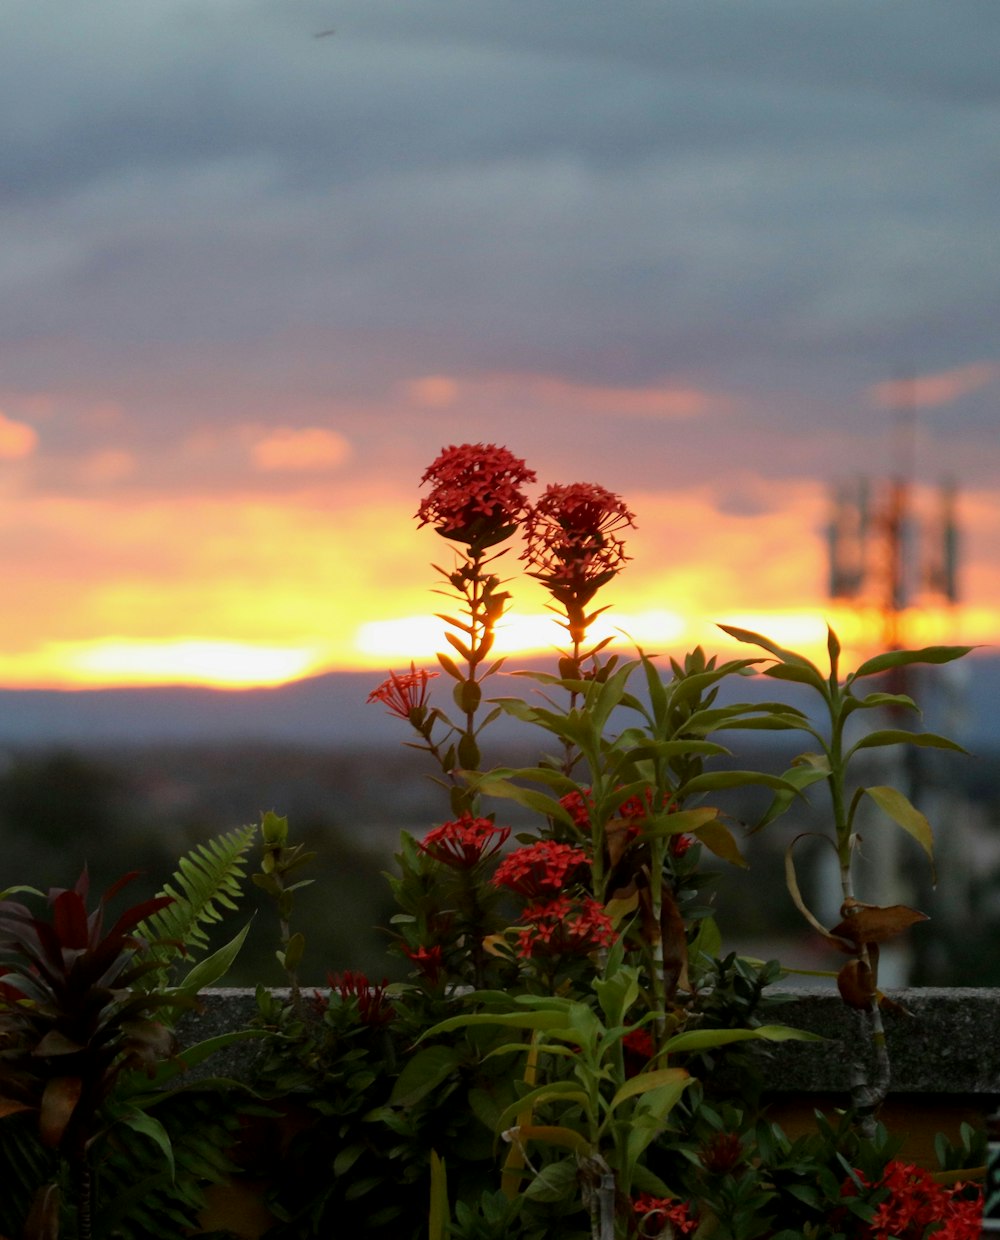 the sun is setting over a city with flowers in the foreground